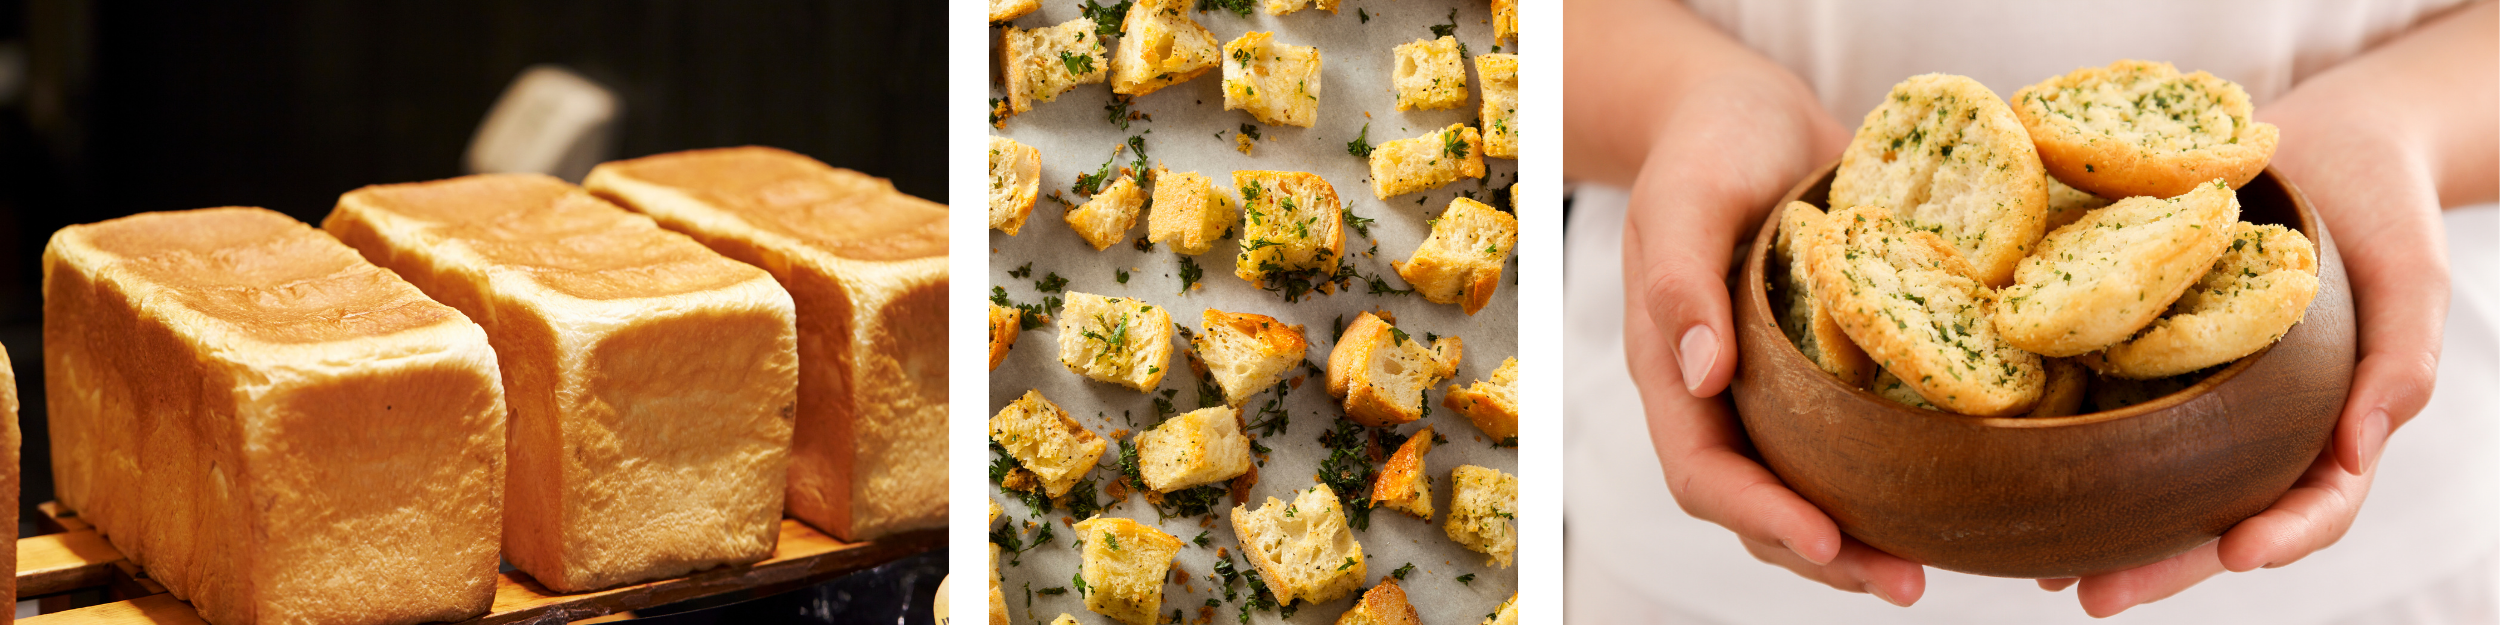 Loaves of bread, croutons and crostini